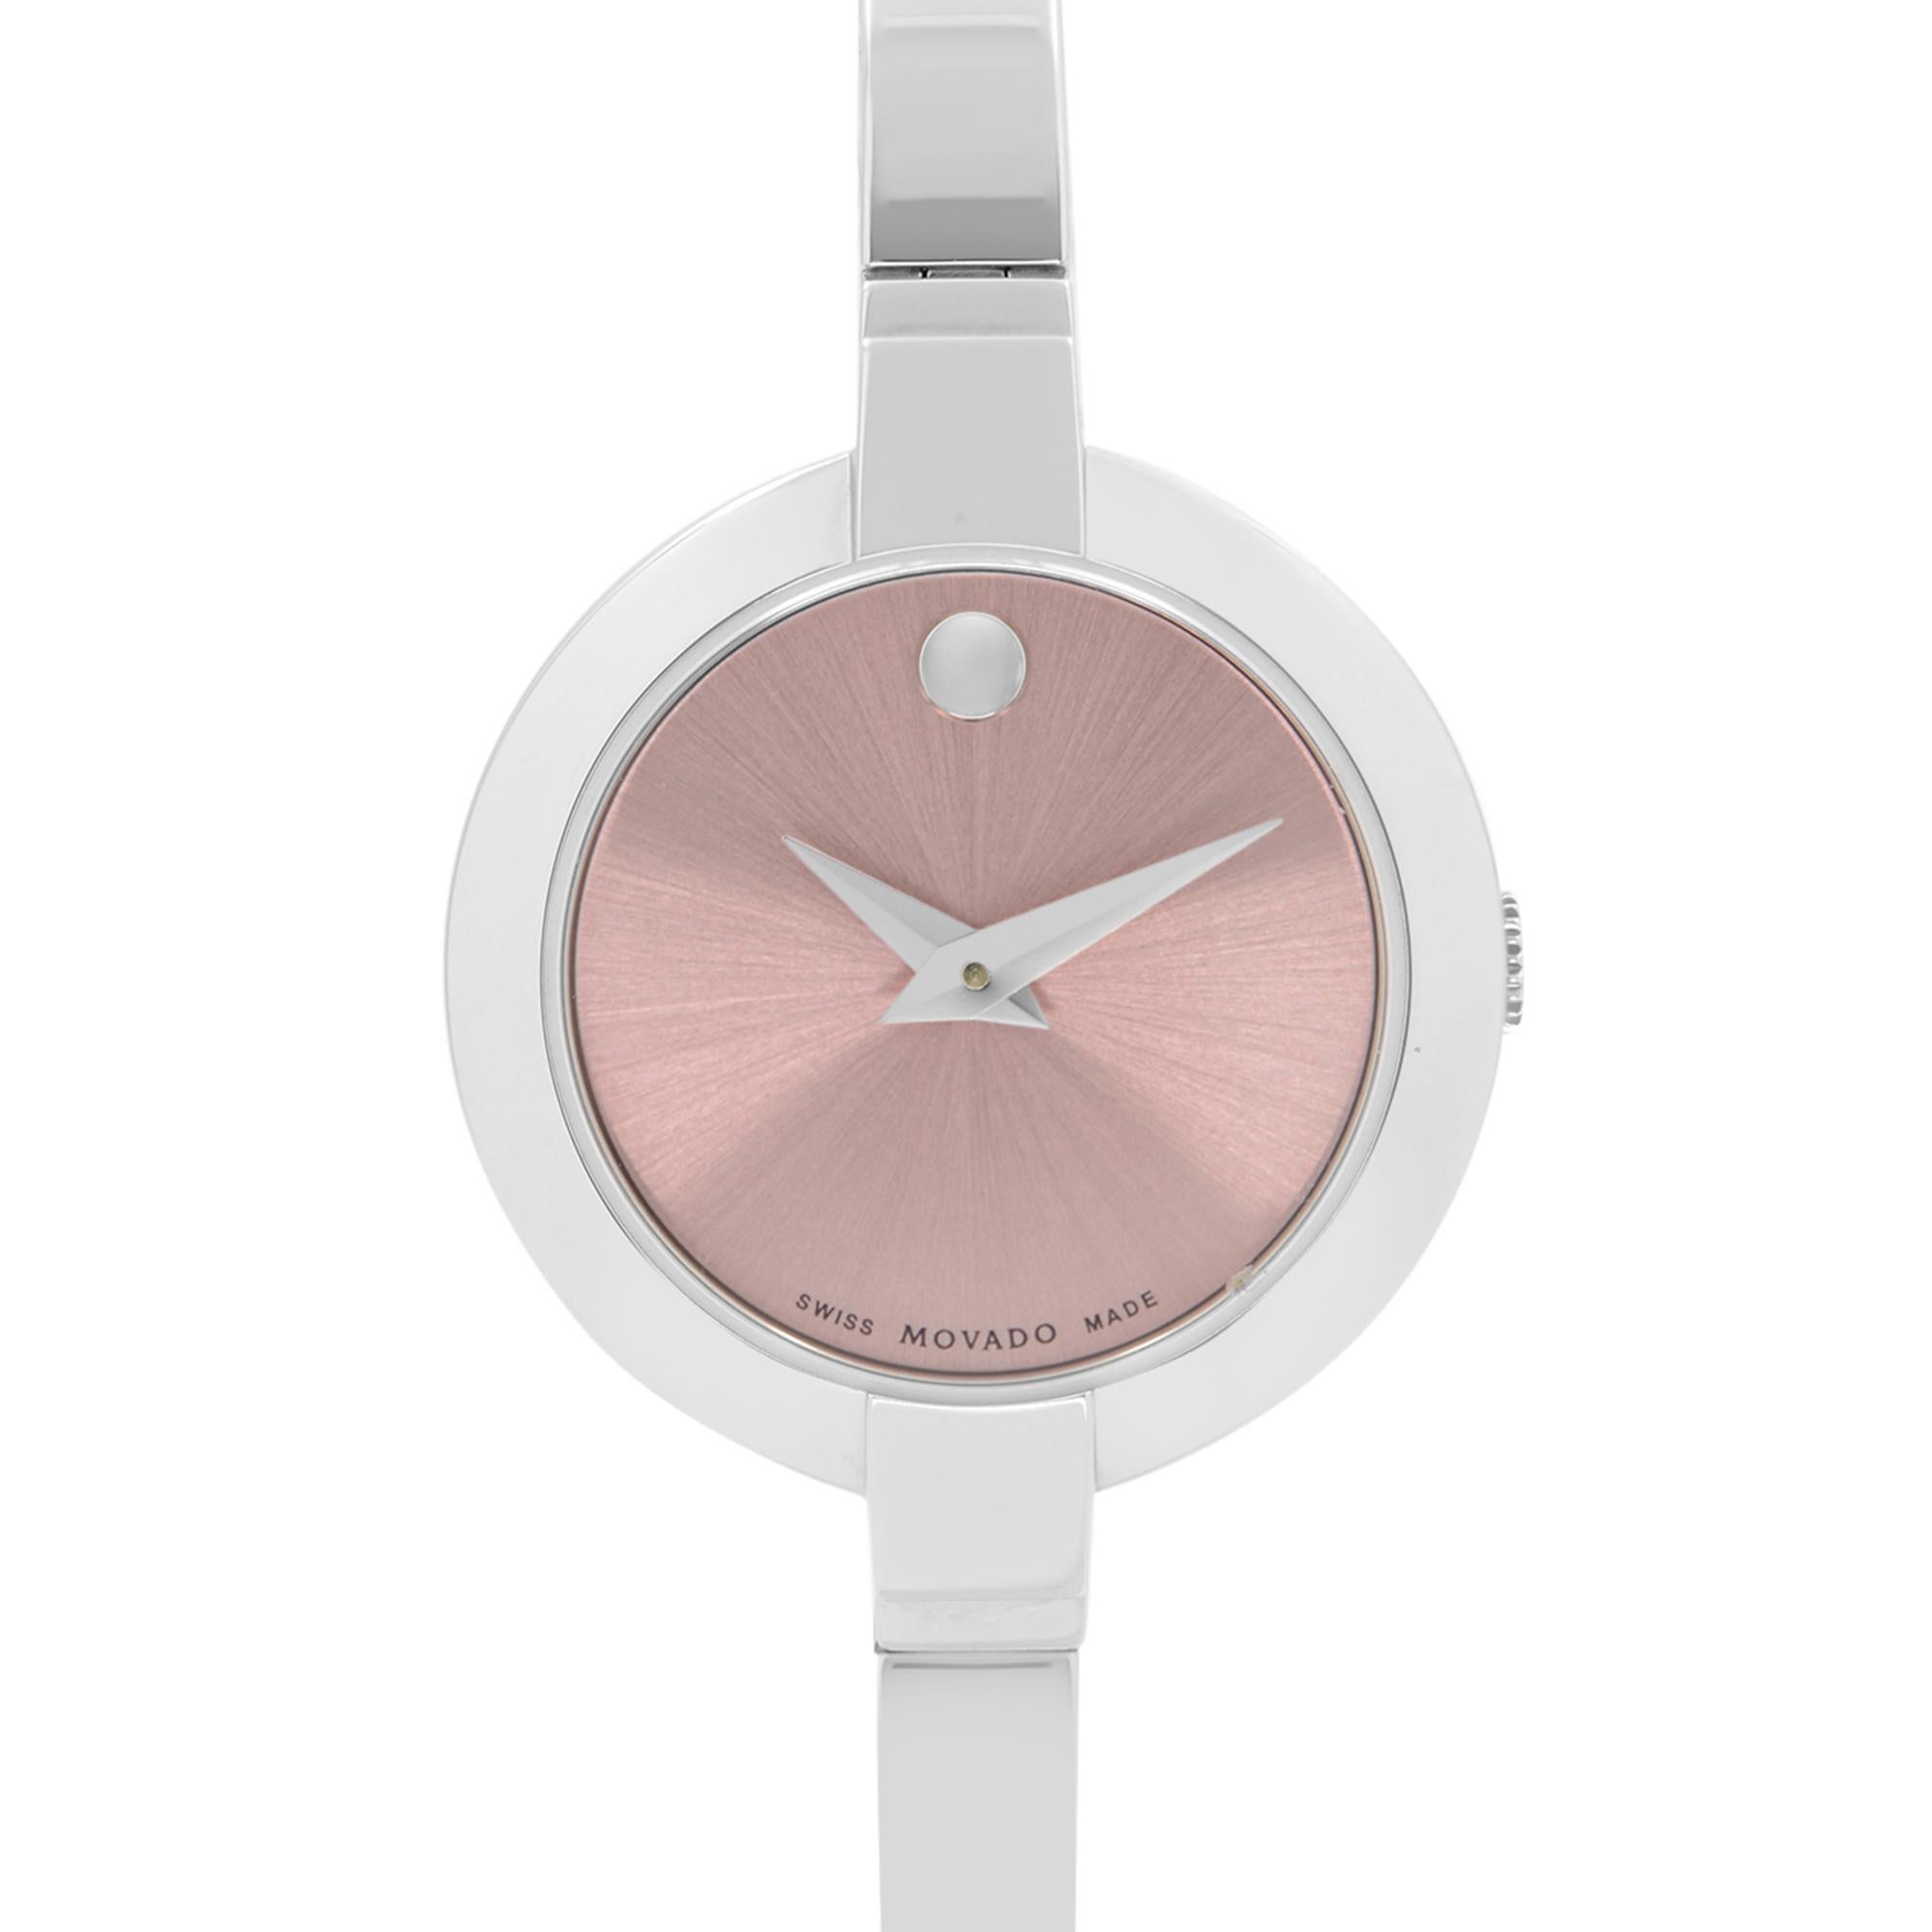 Display Model Movado Bela Stainless Steel Pink Dial Bangle Ladies Quartz Watch 0606596. This Beautiful Timepiece is Powered by Quartz (Battery) Movement And Features: Round Stainless Steel Case with Stainless Steel Bracelet, Fixed Stainless Steel